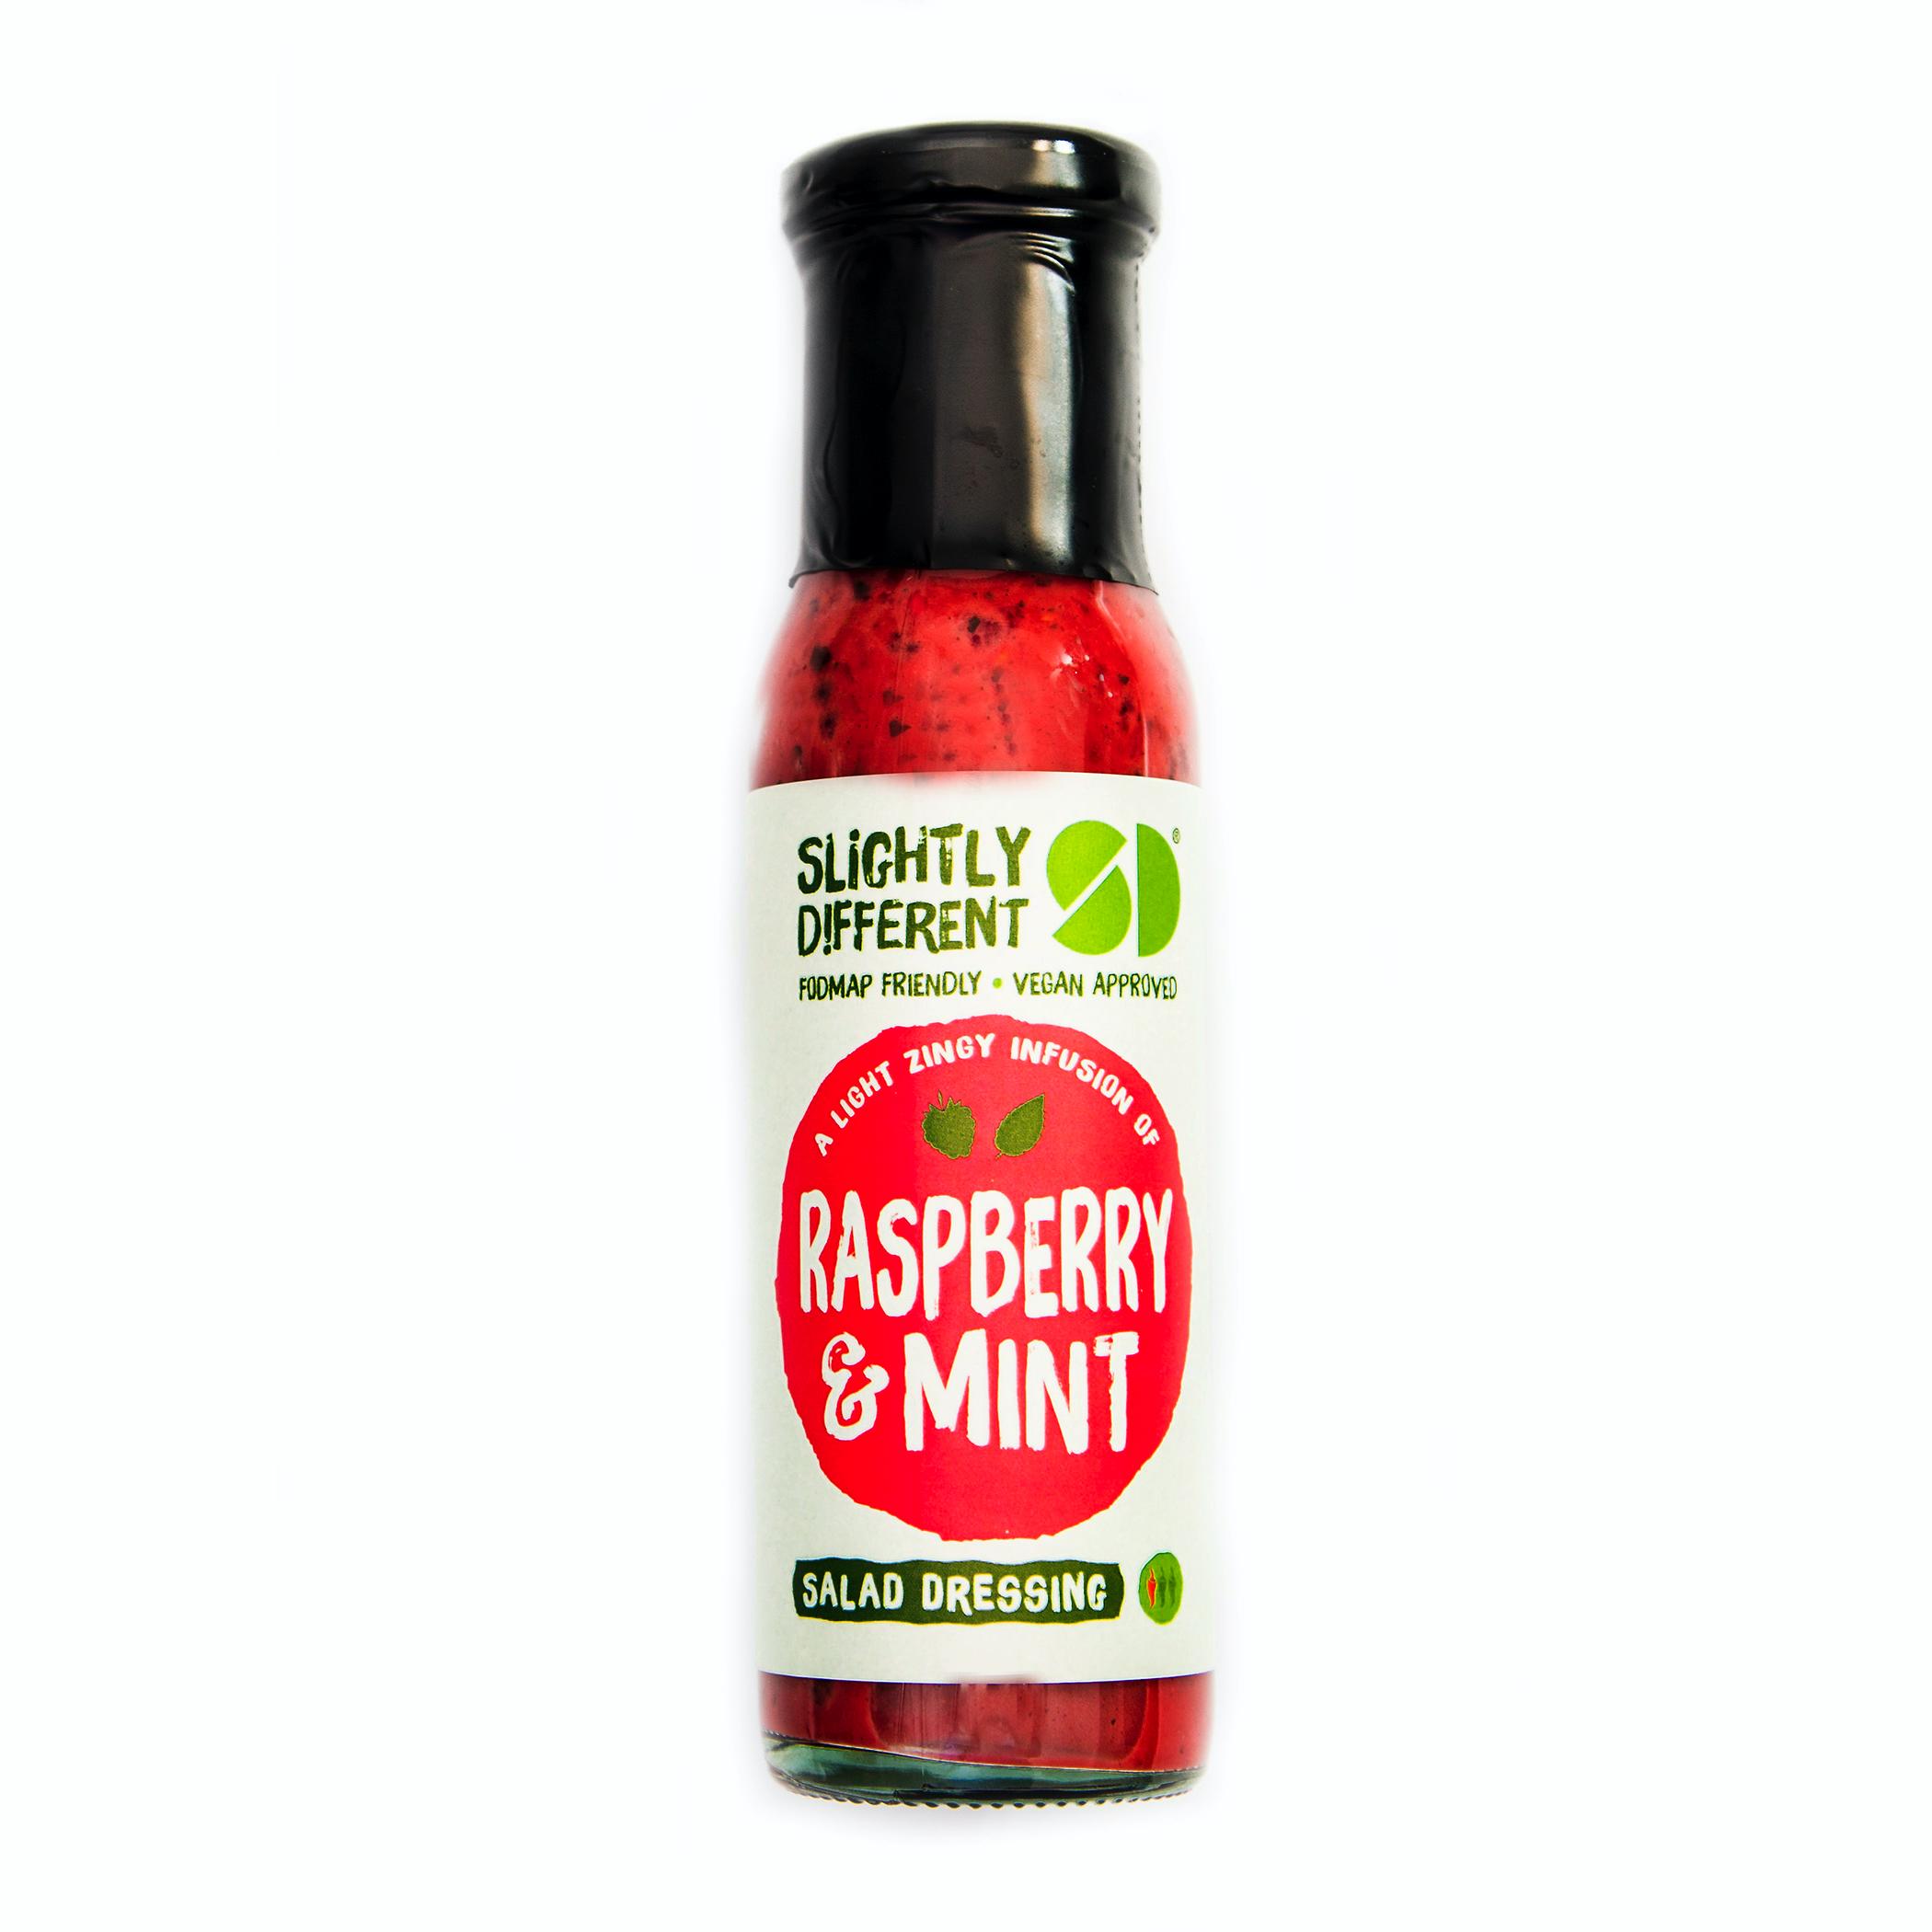 A bottle of Slightly Different's Raspberry & Mint Salad Dressing